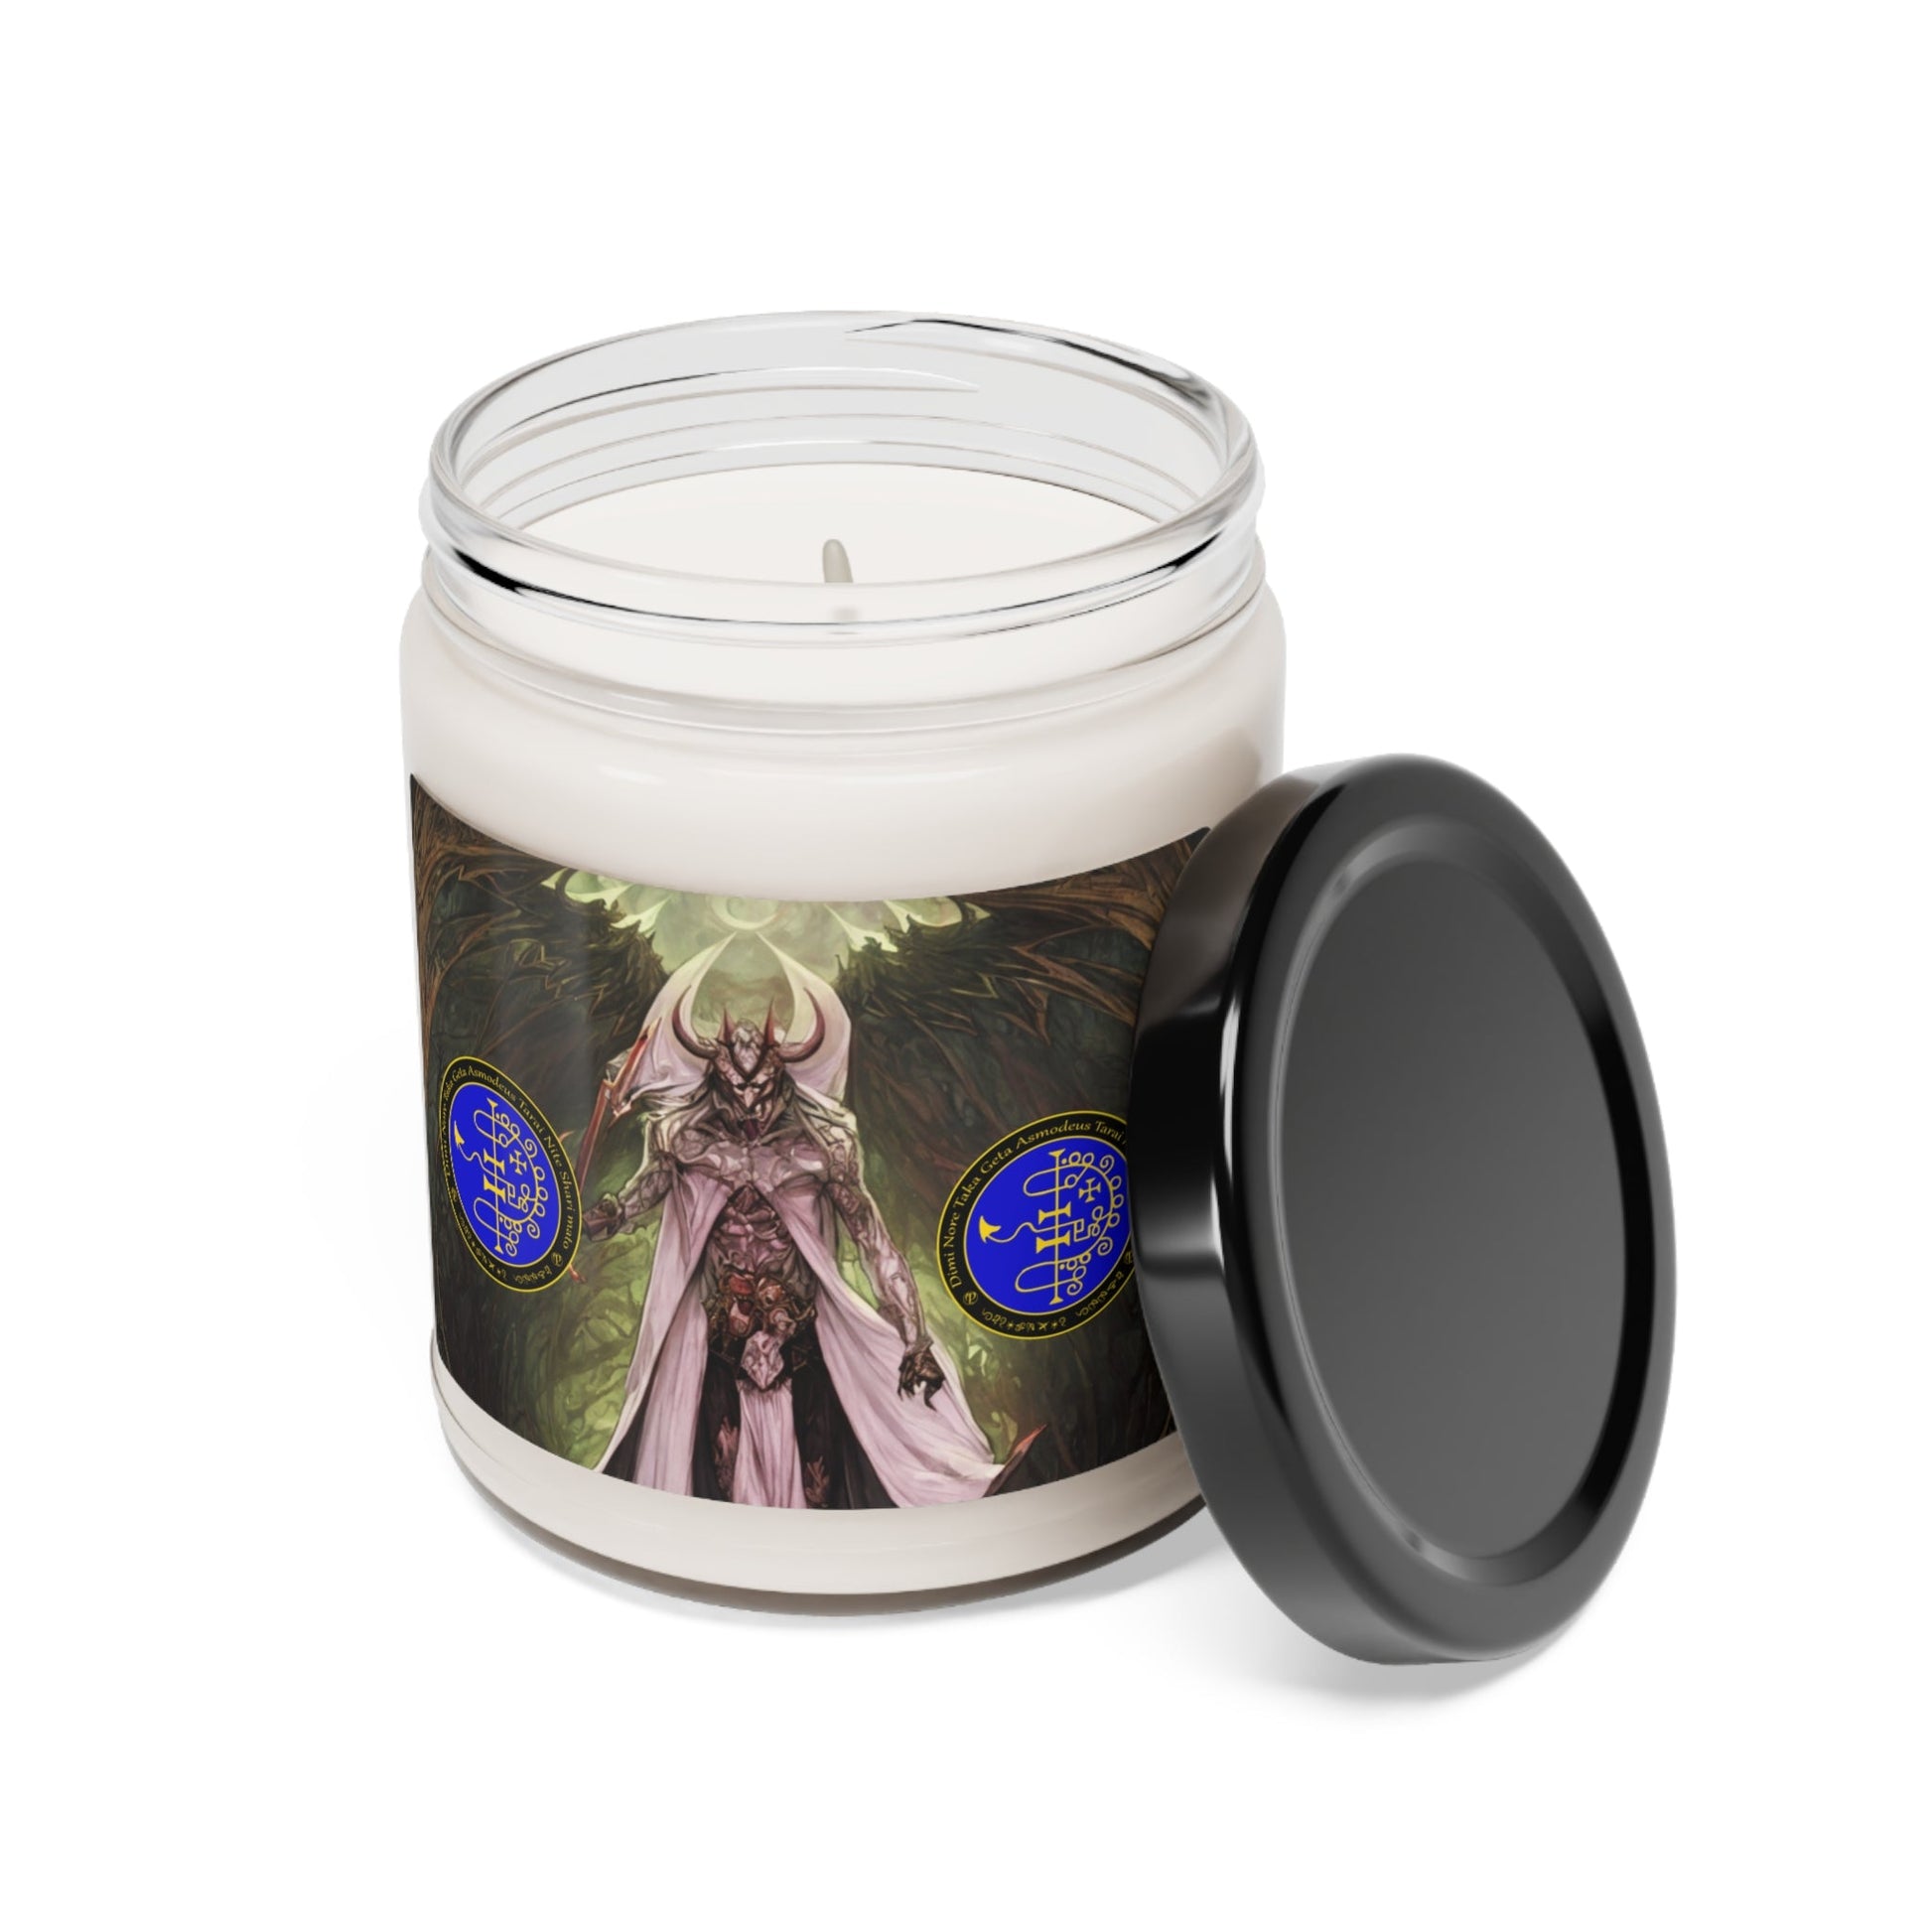 Demon-Asmodeus-oltar-Soy-Scented-Soy Candle-for-Gamble-related-offerings-rituals-inicijations-or-praying-and-meditation-7